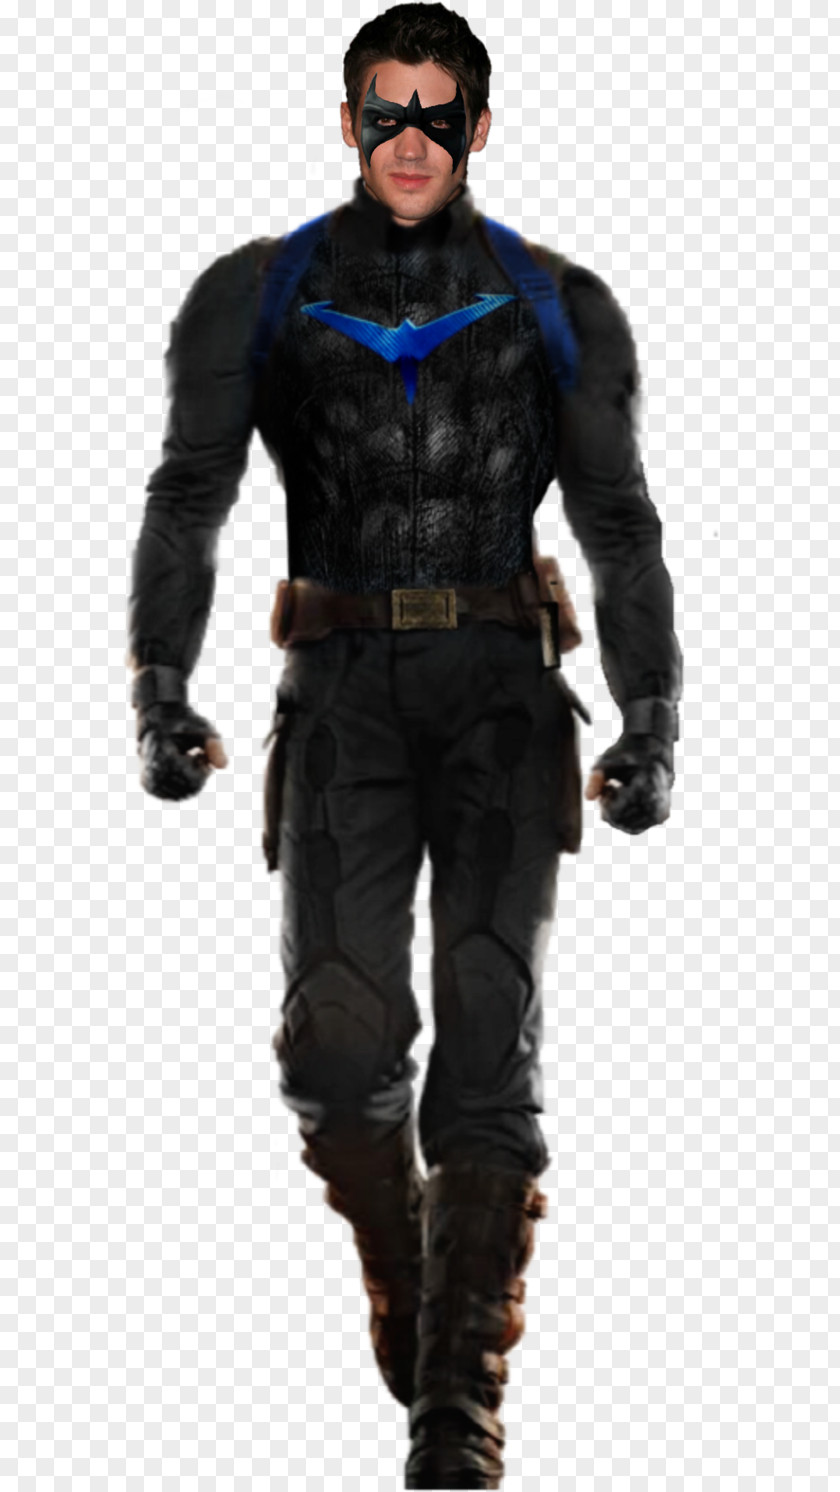 Nightwing Captain America: The Winter Soldier Chris Evans Falcon Bucky PNG